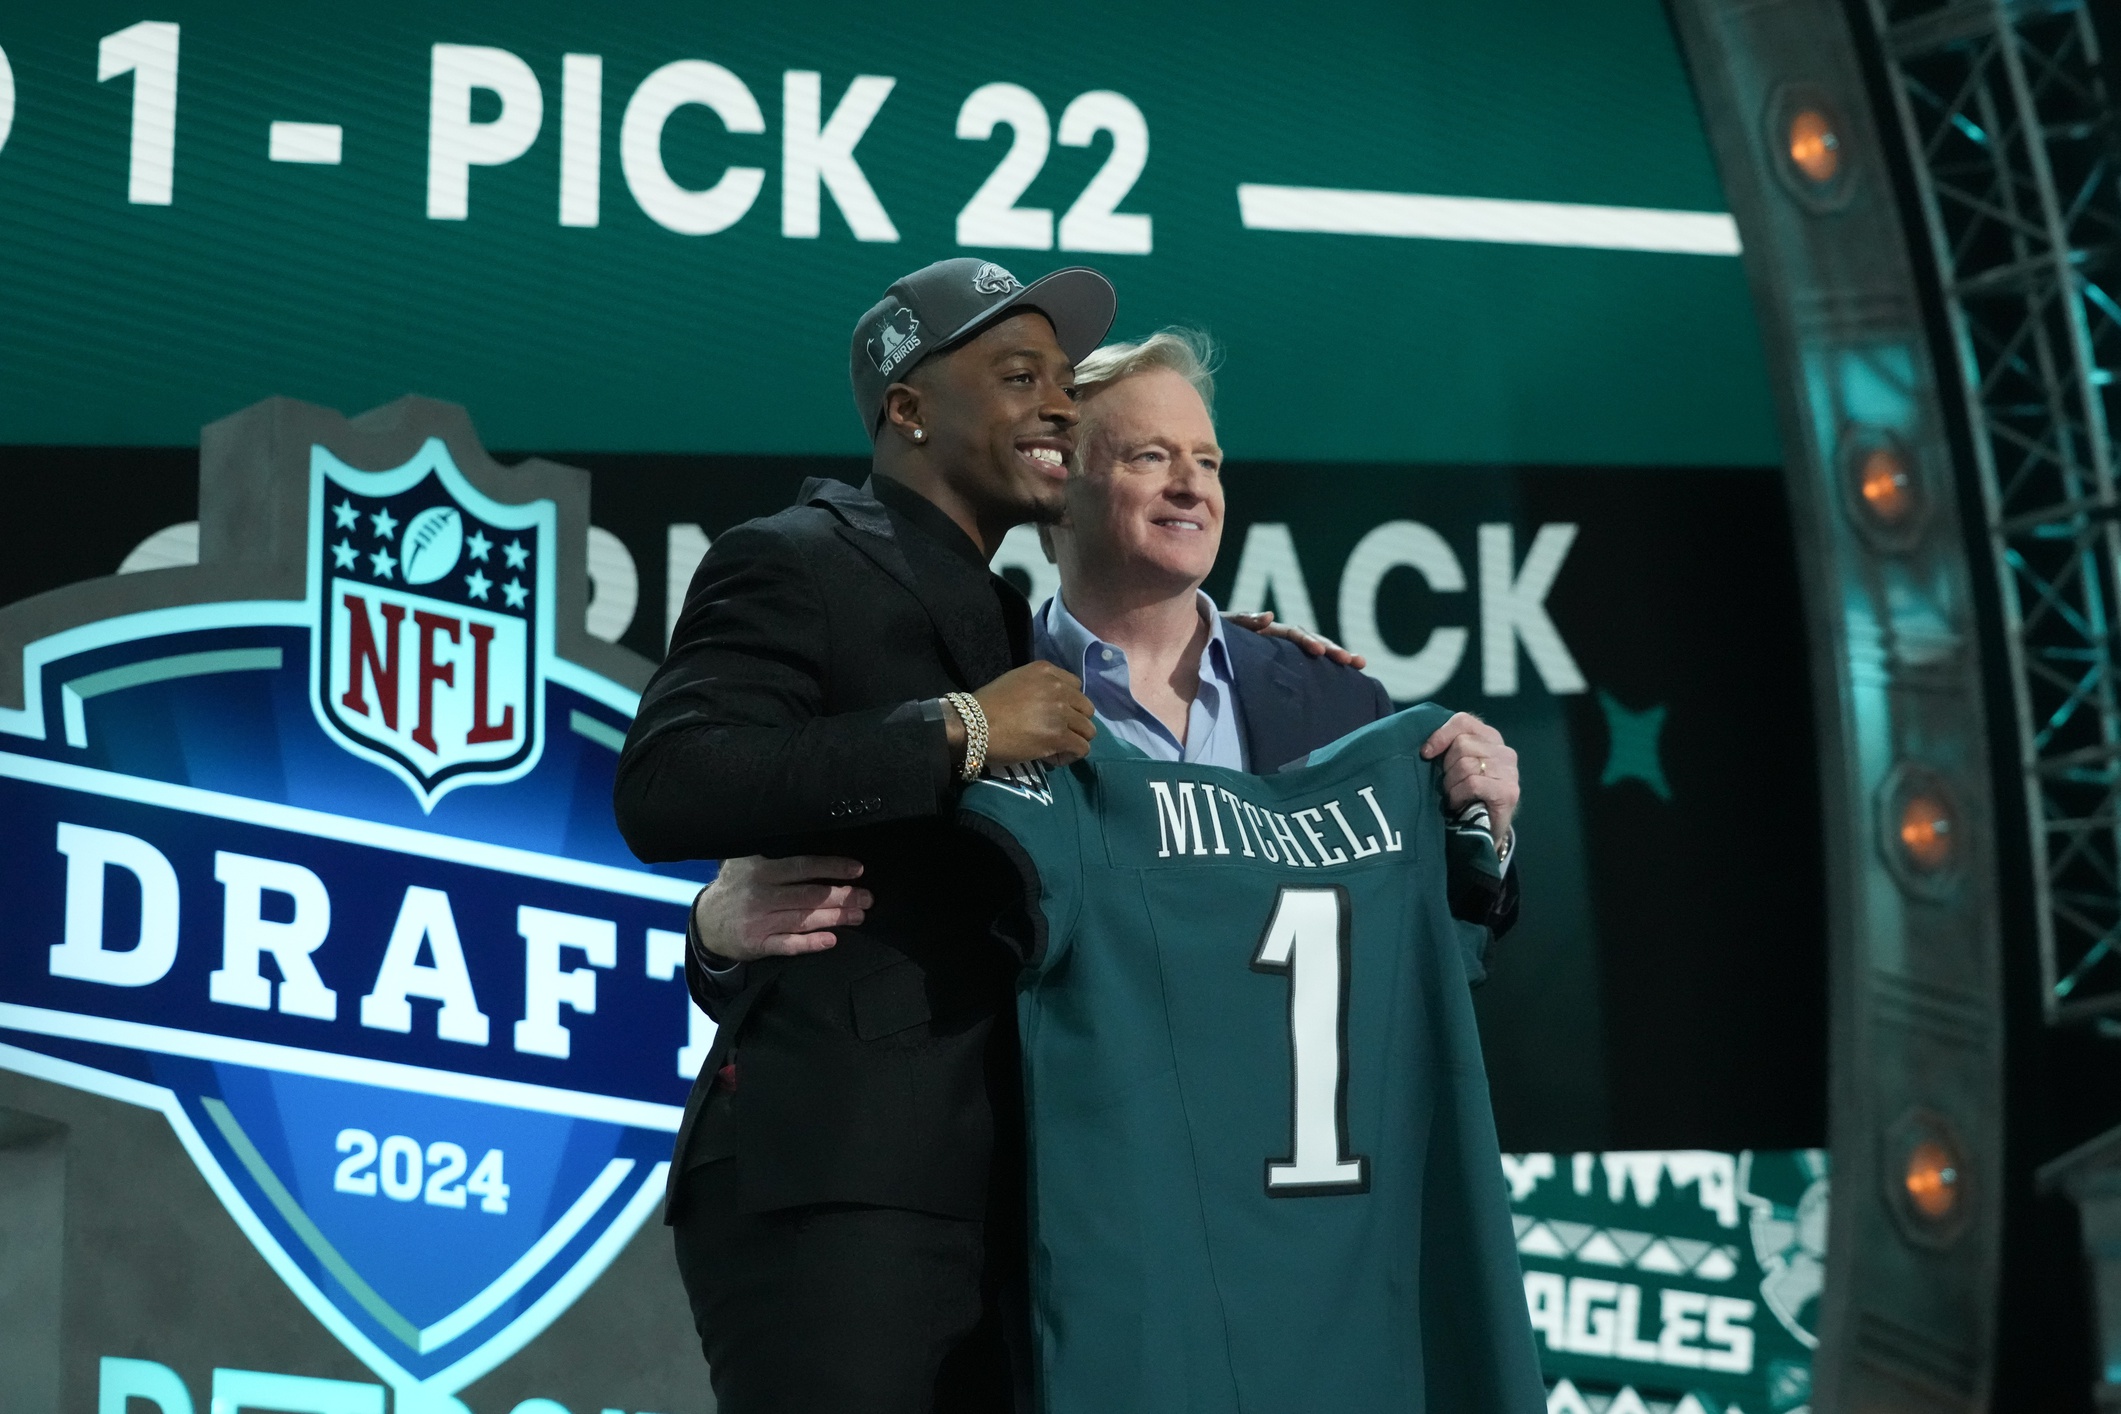 philadelphia eagles news, april 26: draft analyst believes mitchell is a round 1 steal, team’s addition of top prospect prioritizes defensive backfield, and more